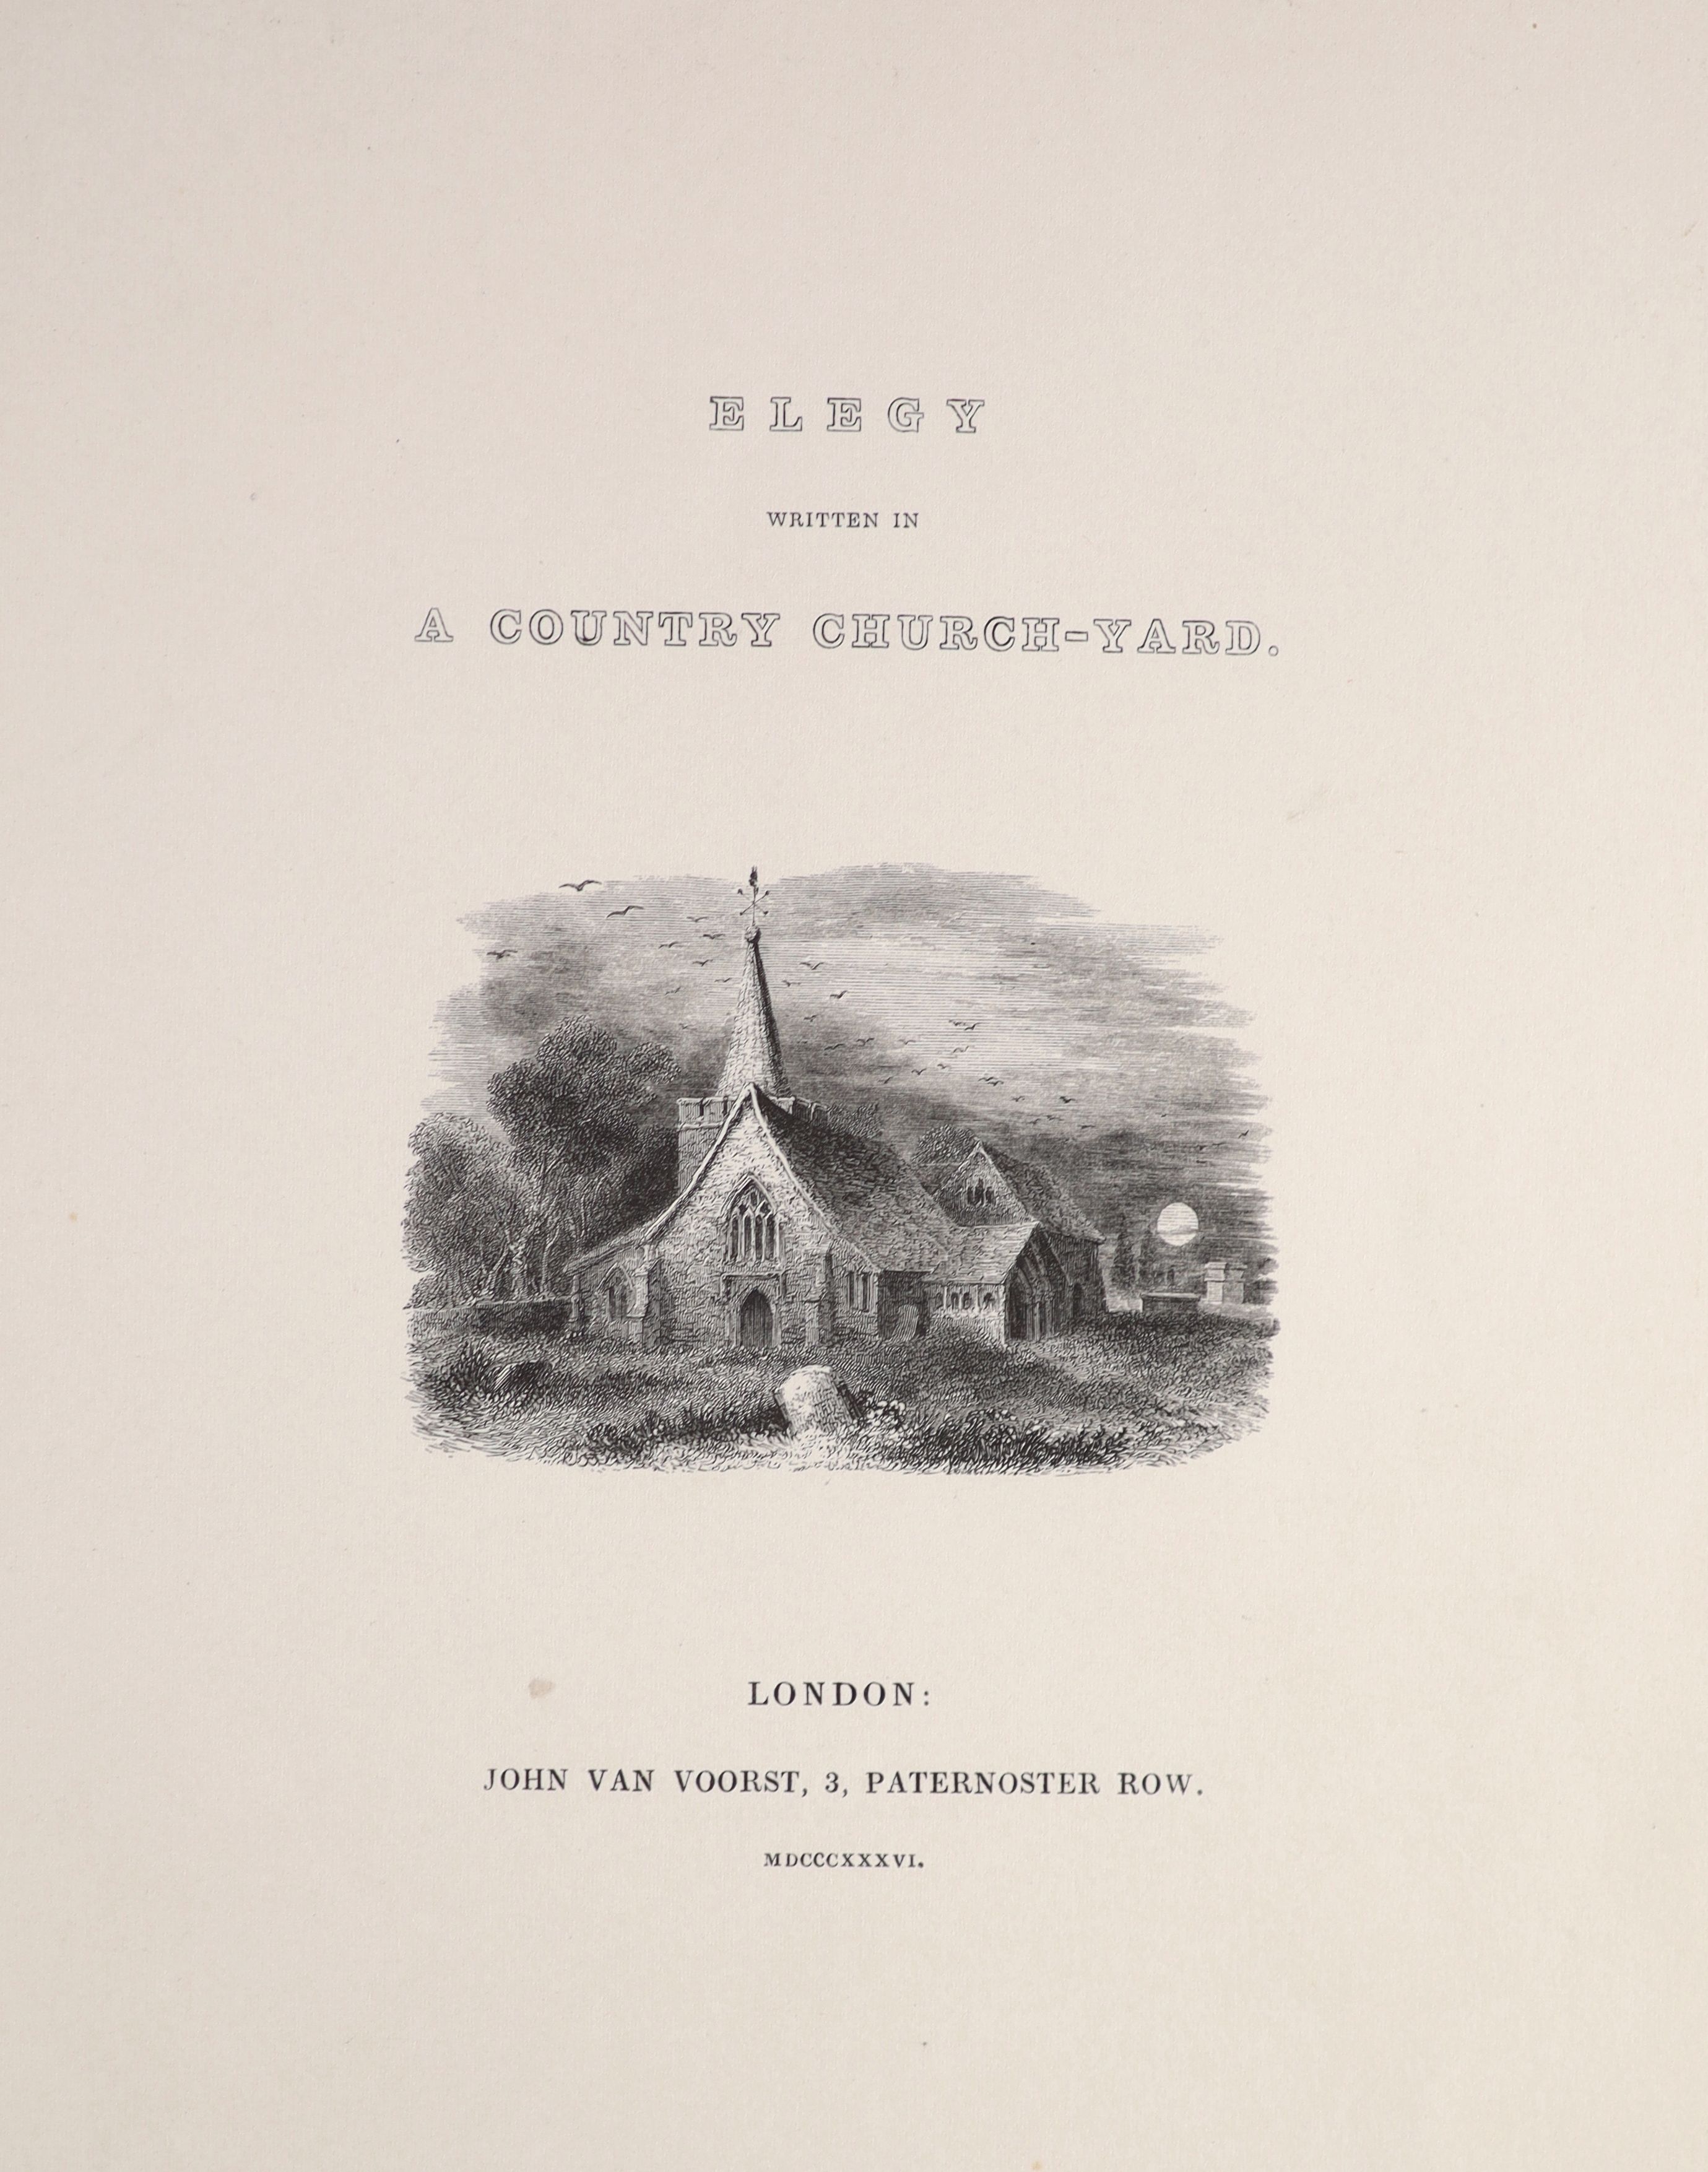 GRAY, THOMAS (1716-1771) - Elegy Written in a Country Church-Yard. ‘’Gray’s Elegy’’, edited and with introduction by John Martin (1791-1855), dedicated to Samuel Rogers, specially commissioned by the editor, 4to, red mor